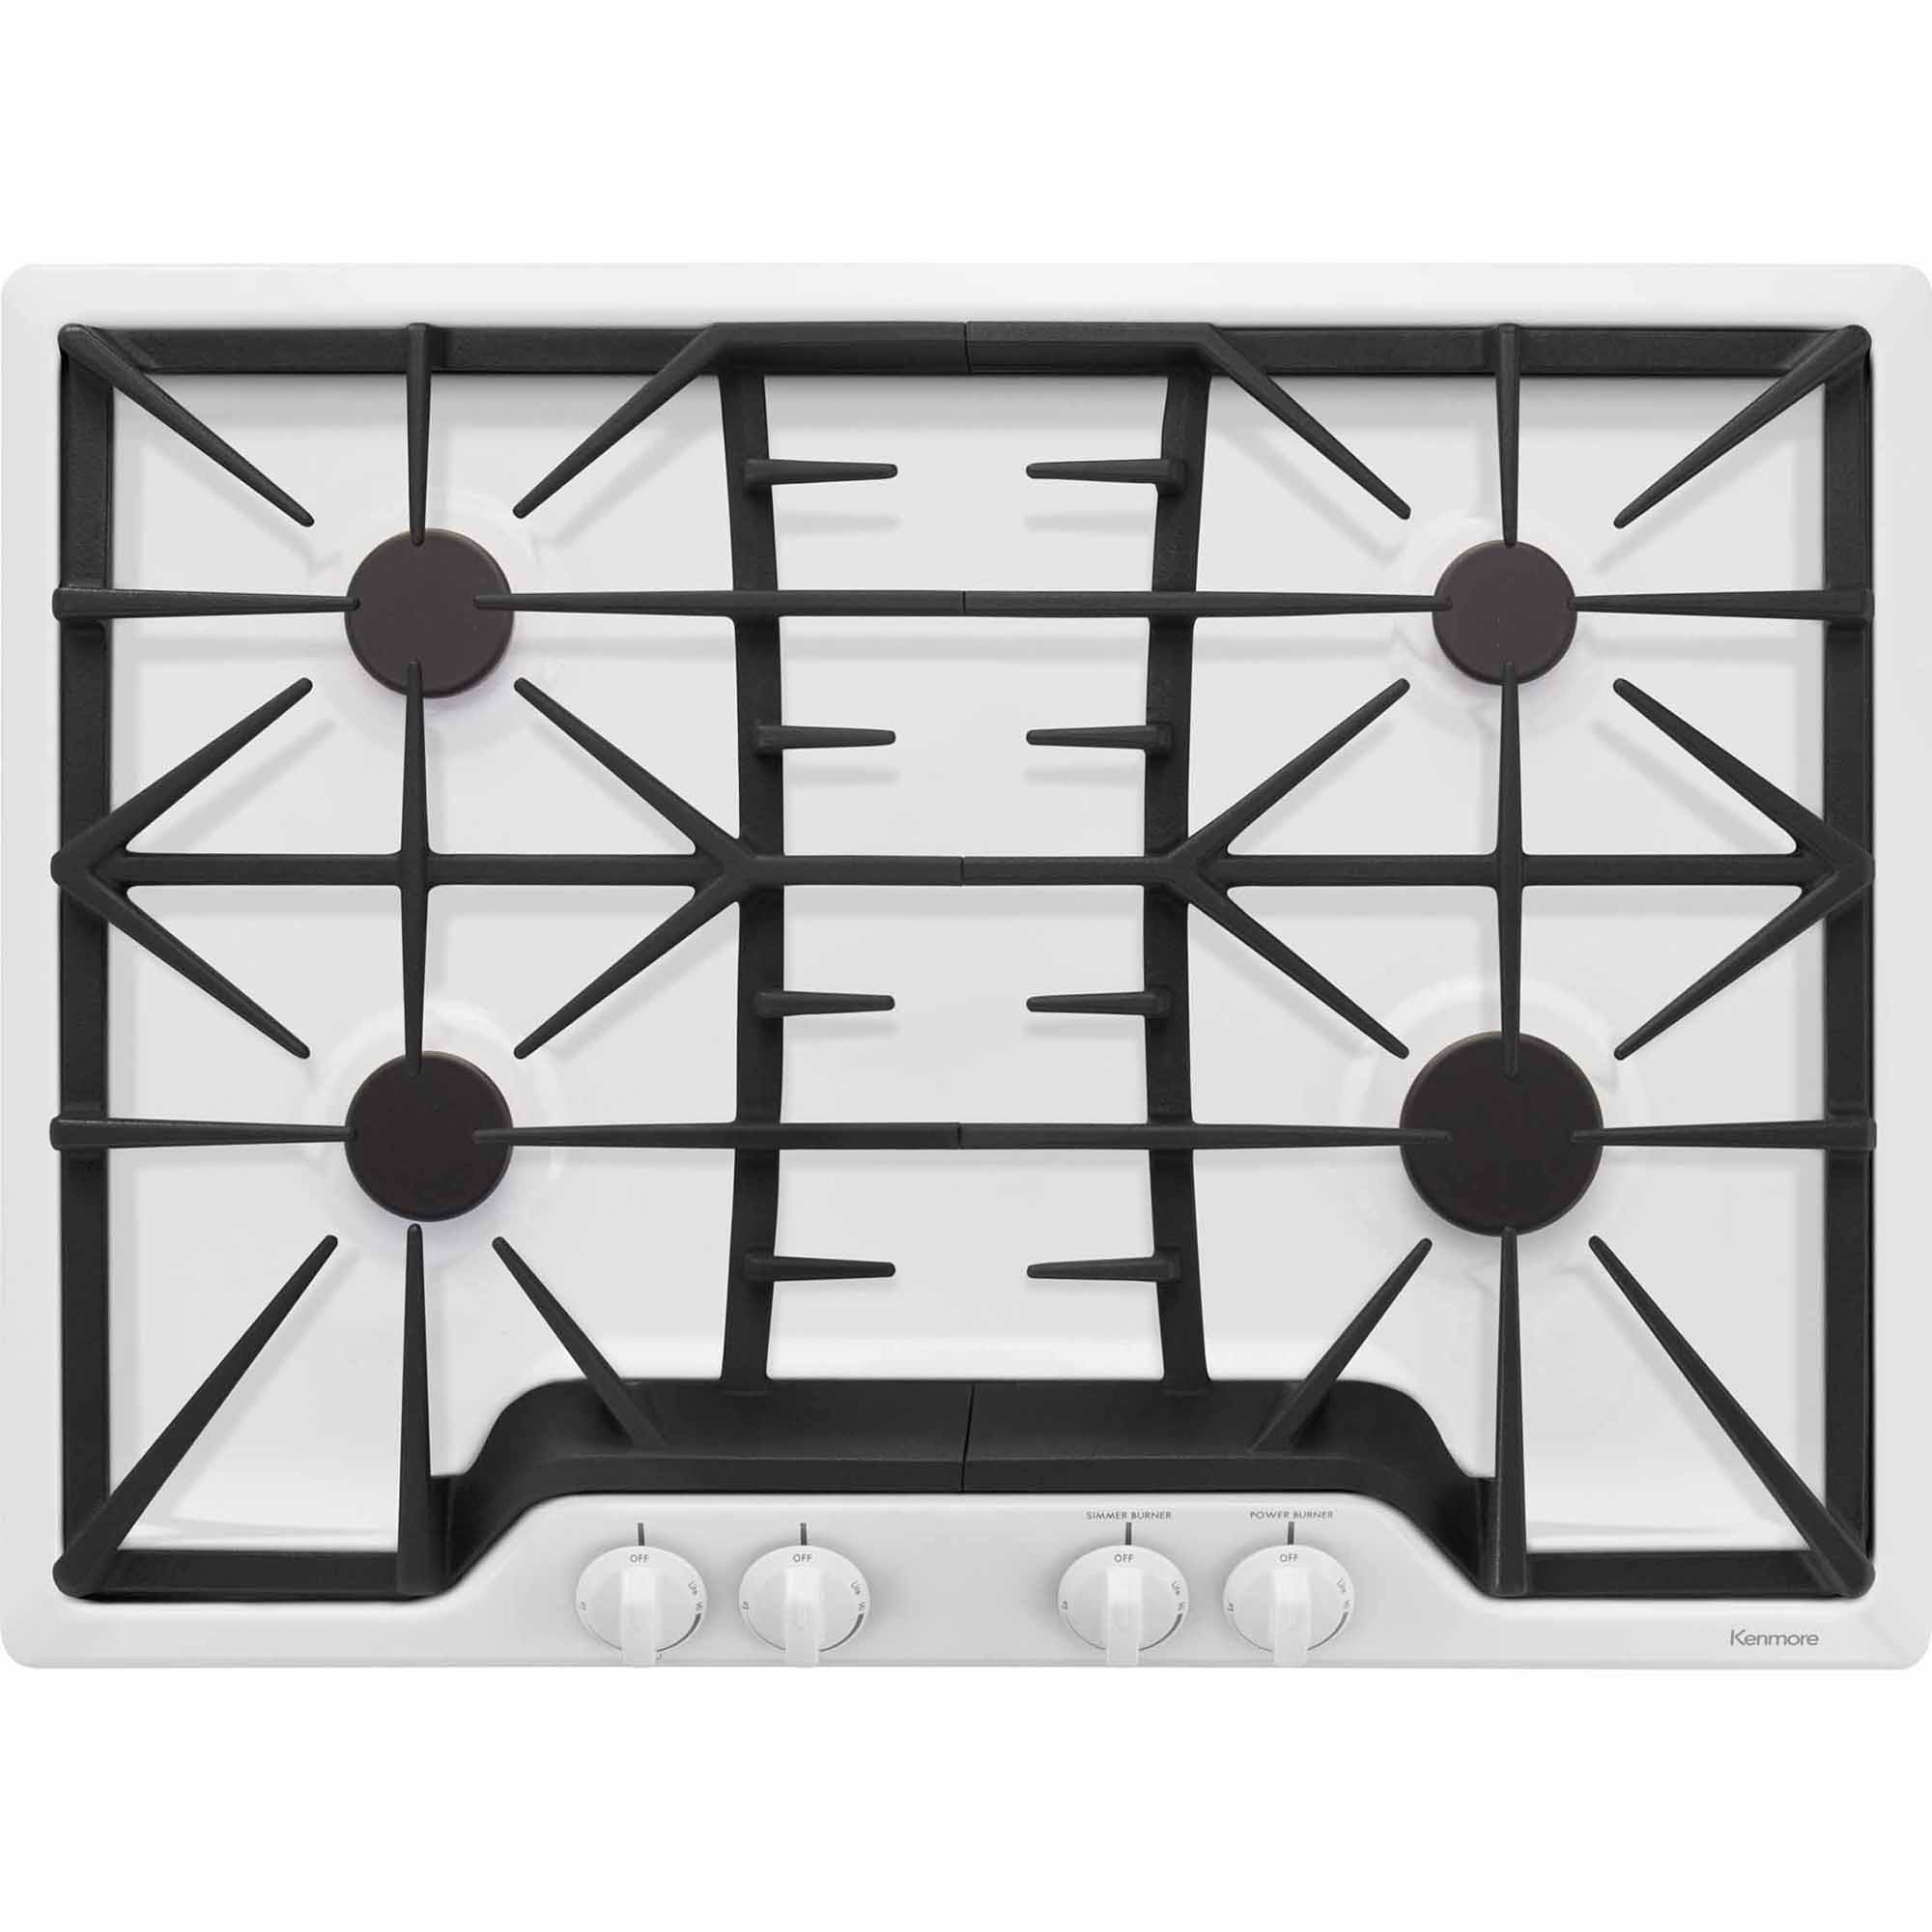 Kenmore 32532 30 Gas Cooktop - White